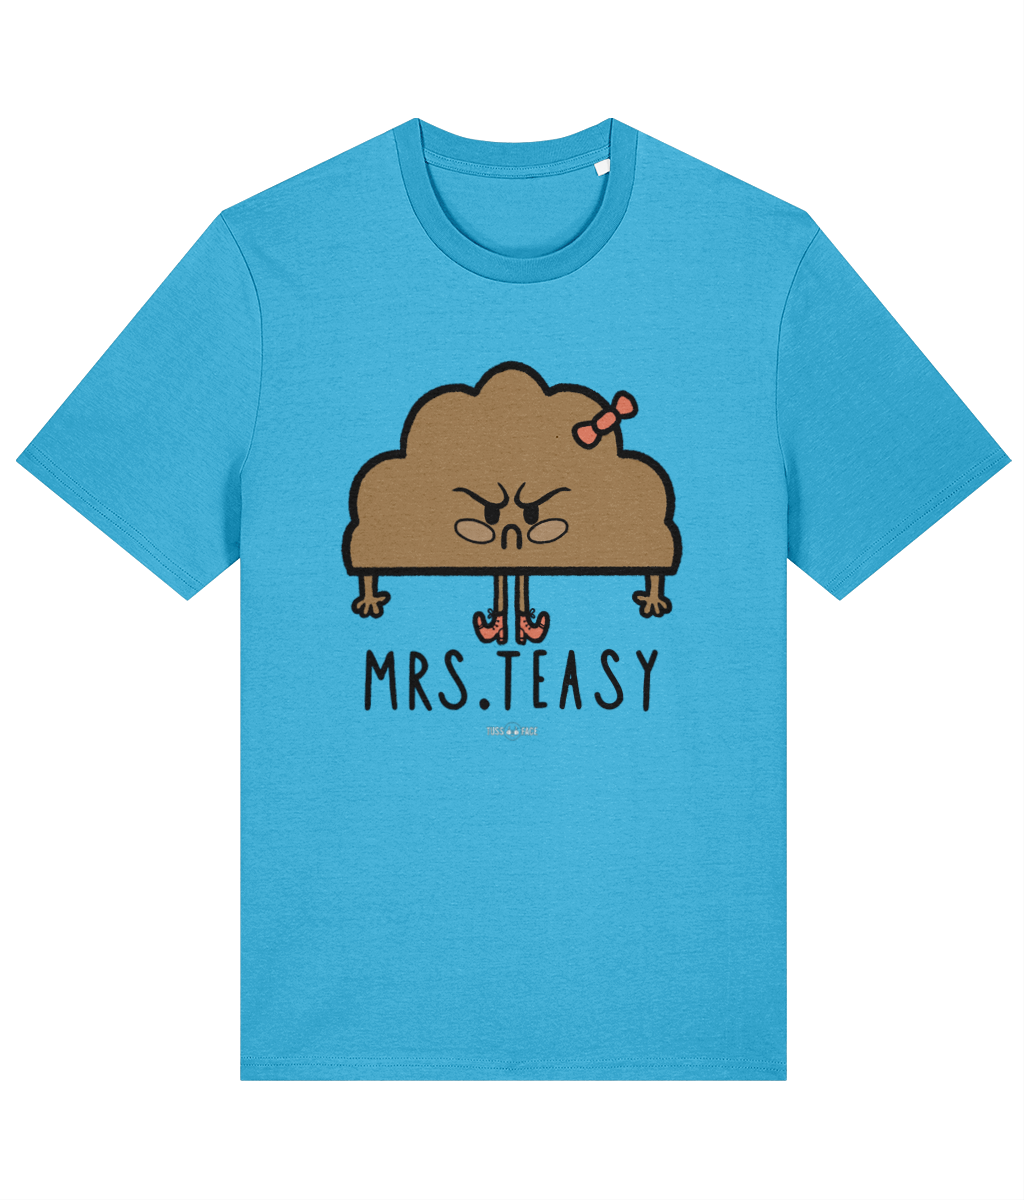 Mrs.Teasy - Cornish dialect Tussface T-shirt